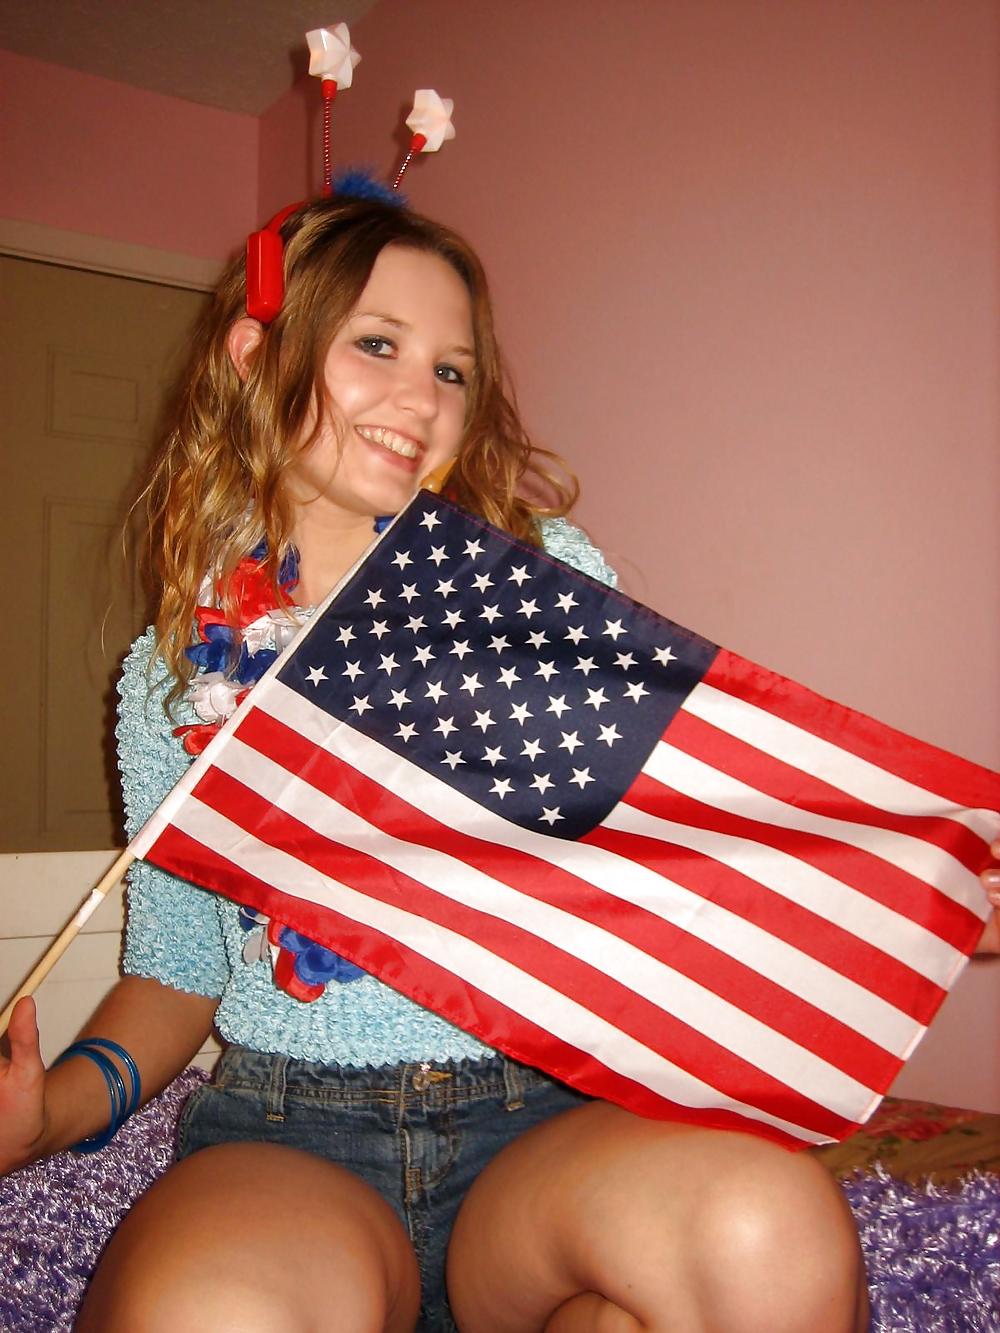 4th July adult photos